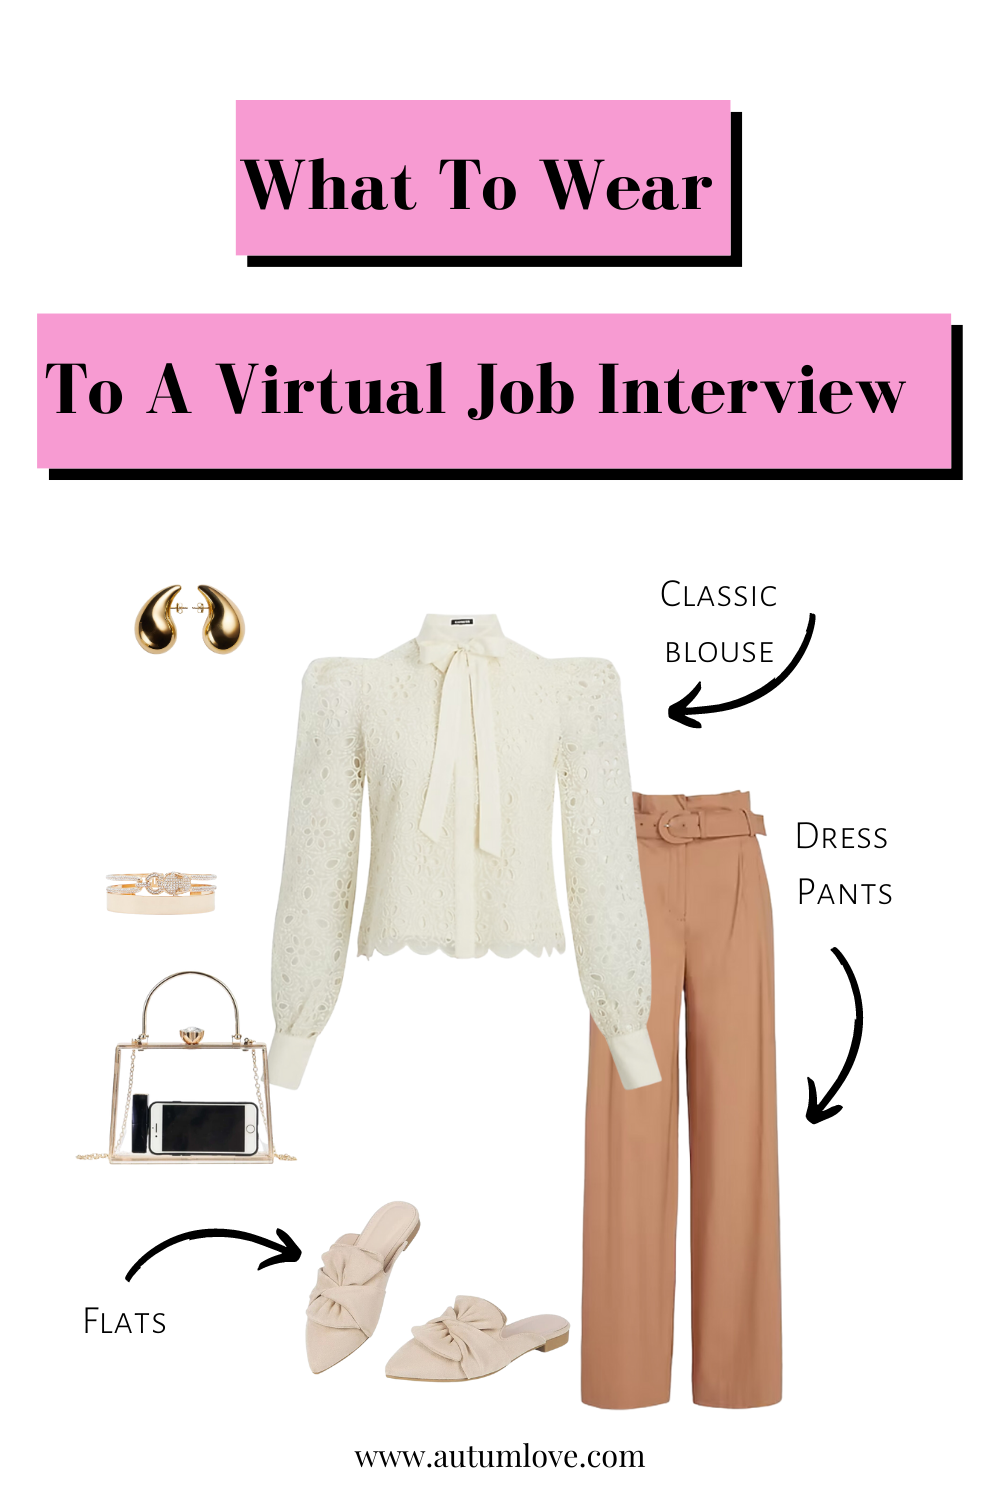 Dress for Success: Professional Outfit Ideas for Women's Job